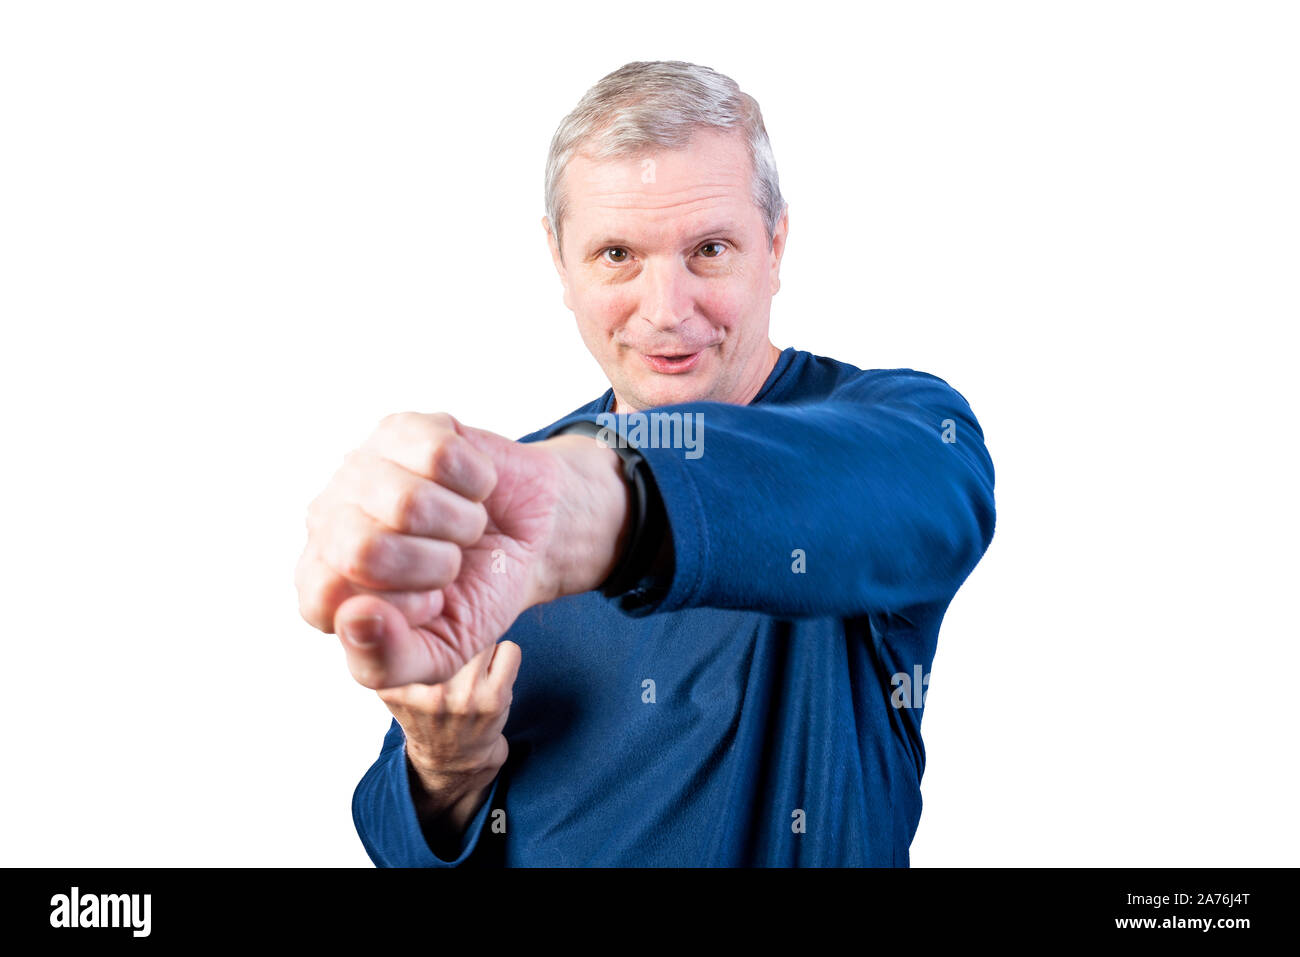 An elderly man demonstrates fist fight. Isolated on a white background. Stock Photo